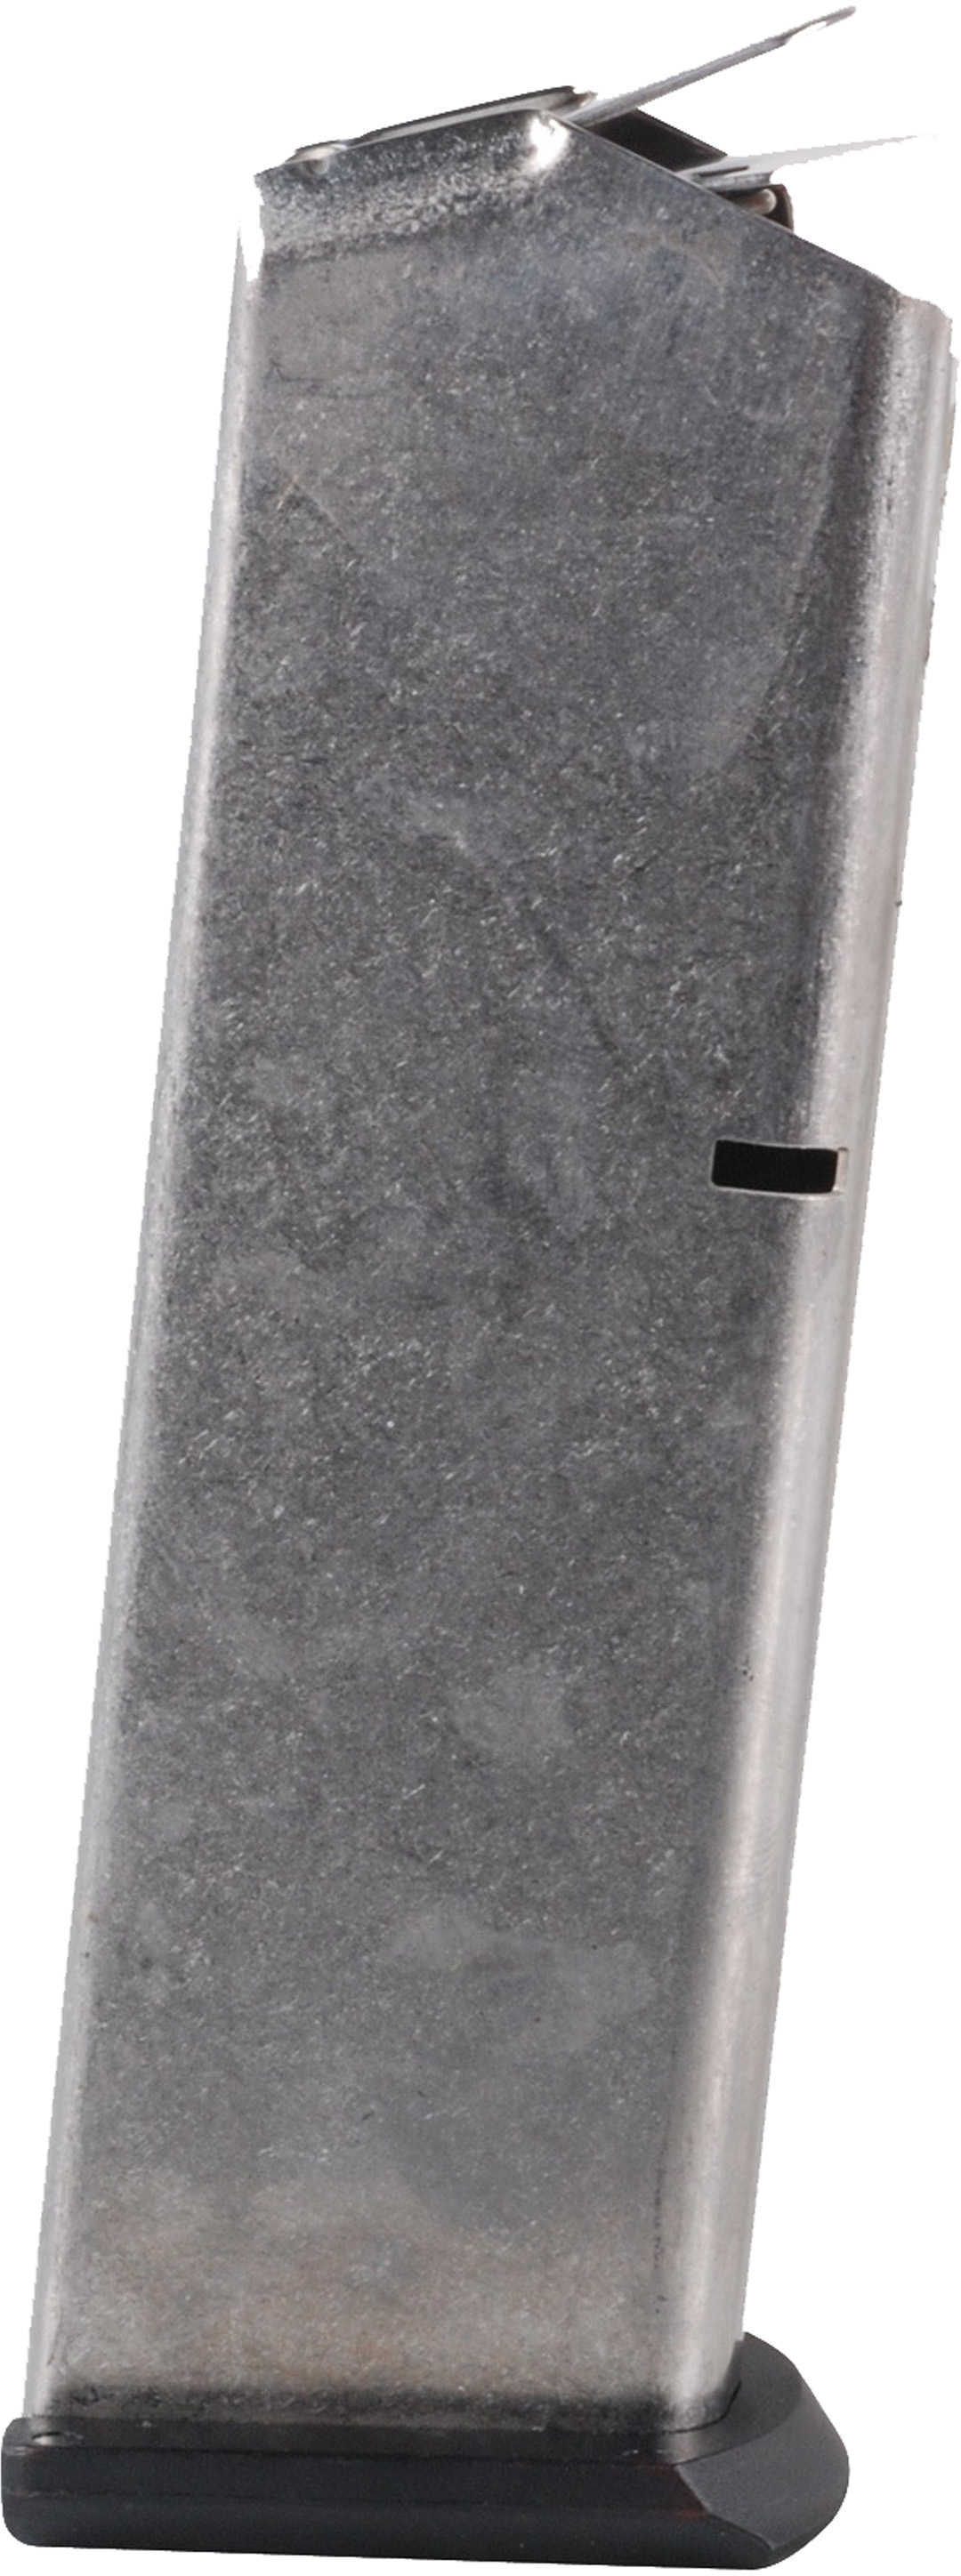 Ruger Handgun Magazine For P345 .45 ACP 8rds Stainless